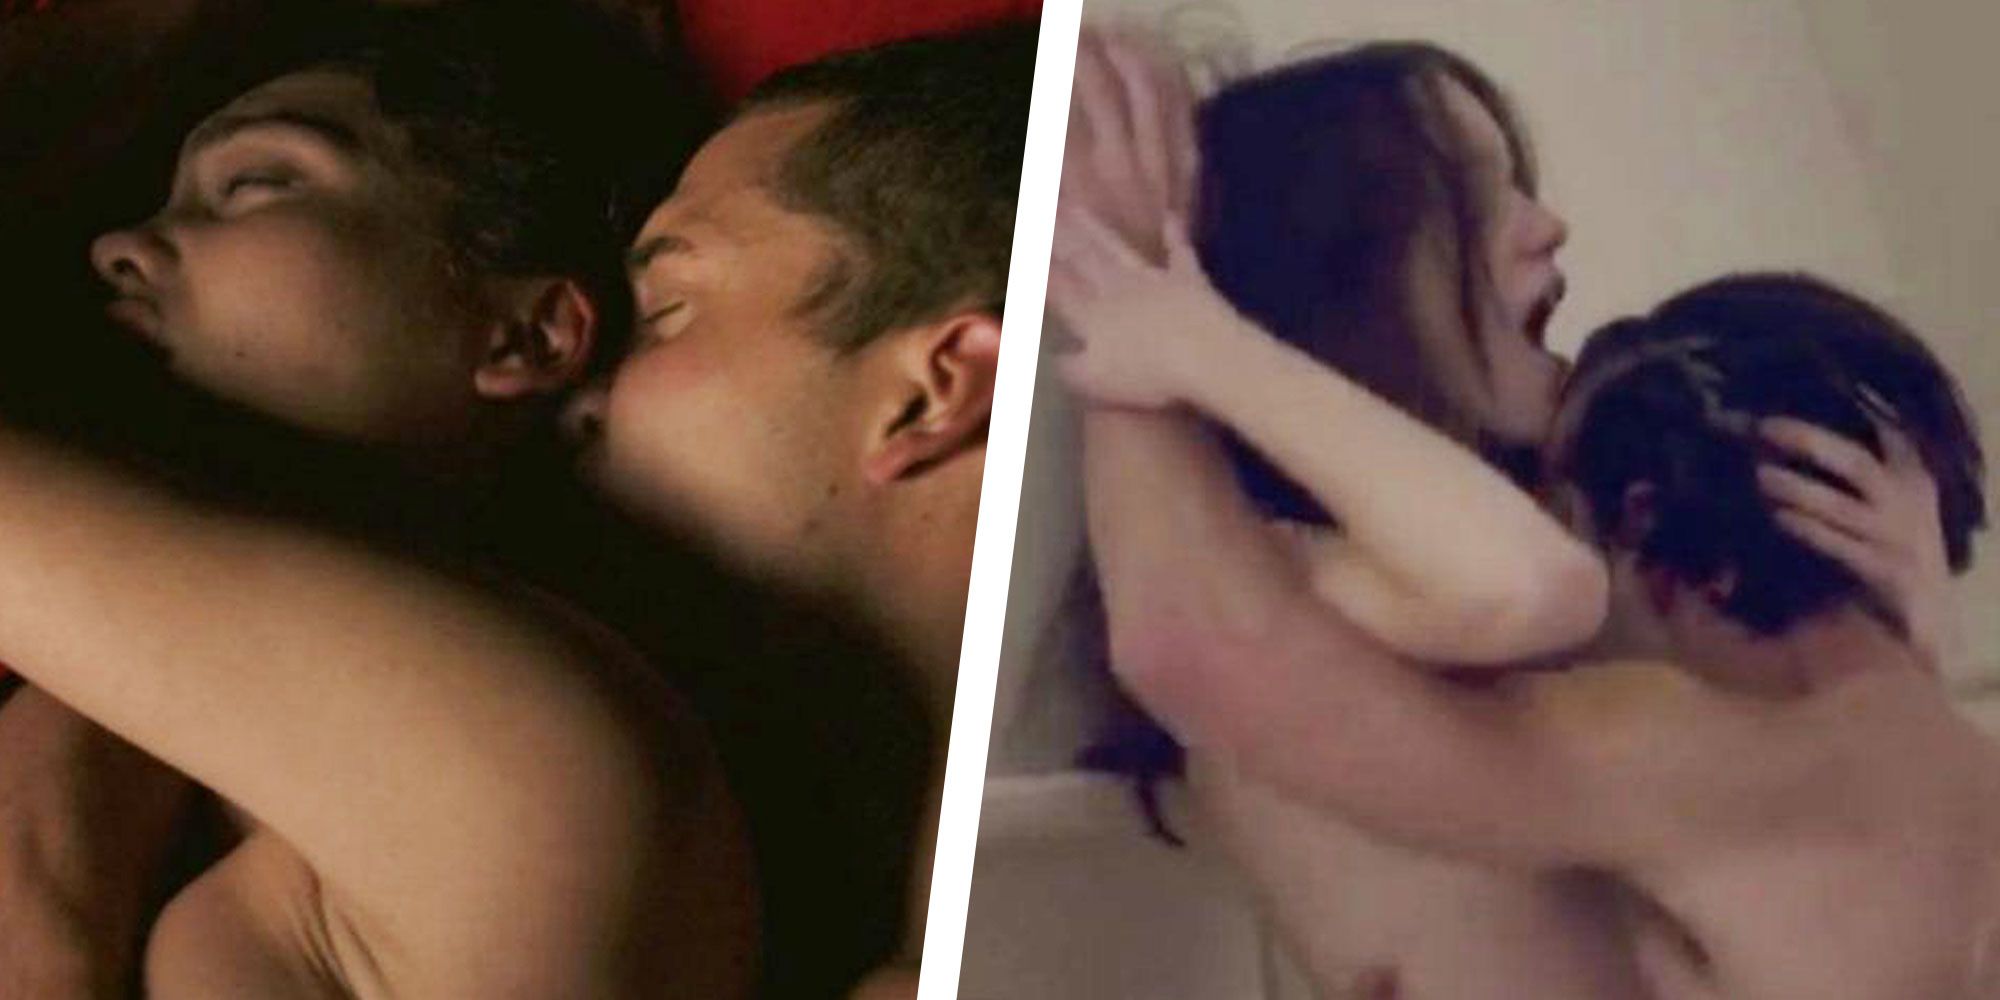 Movies with fully visible sex scenes